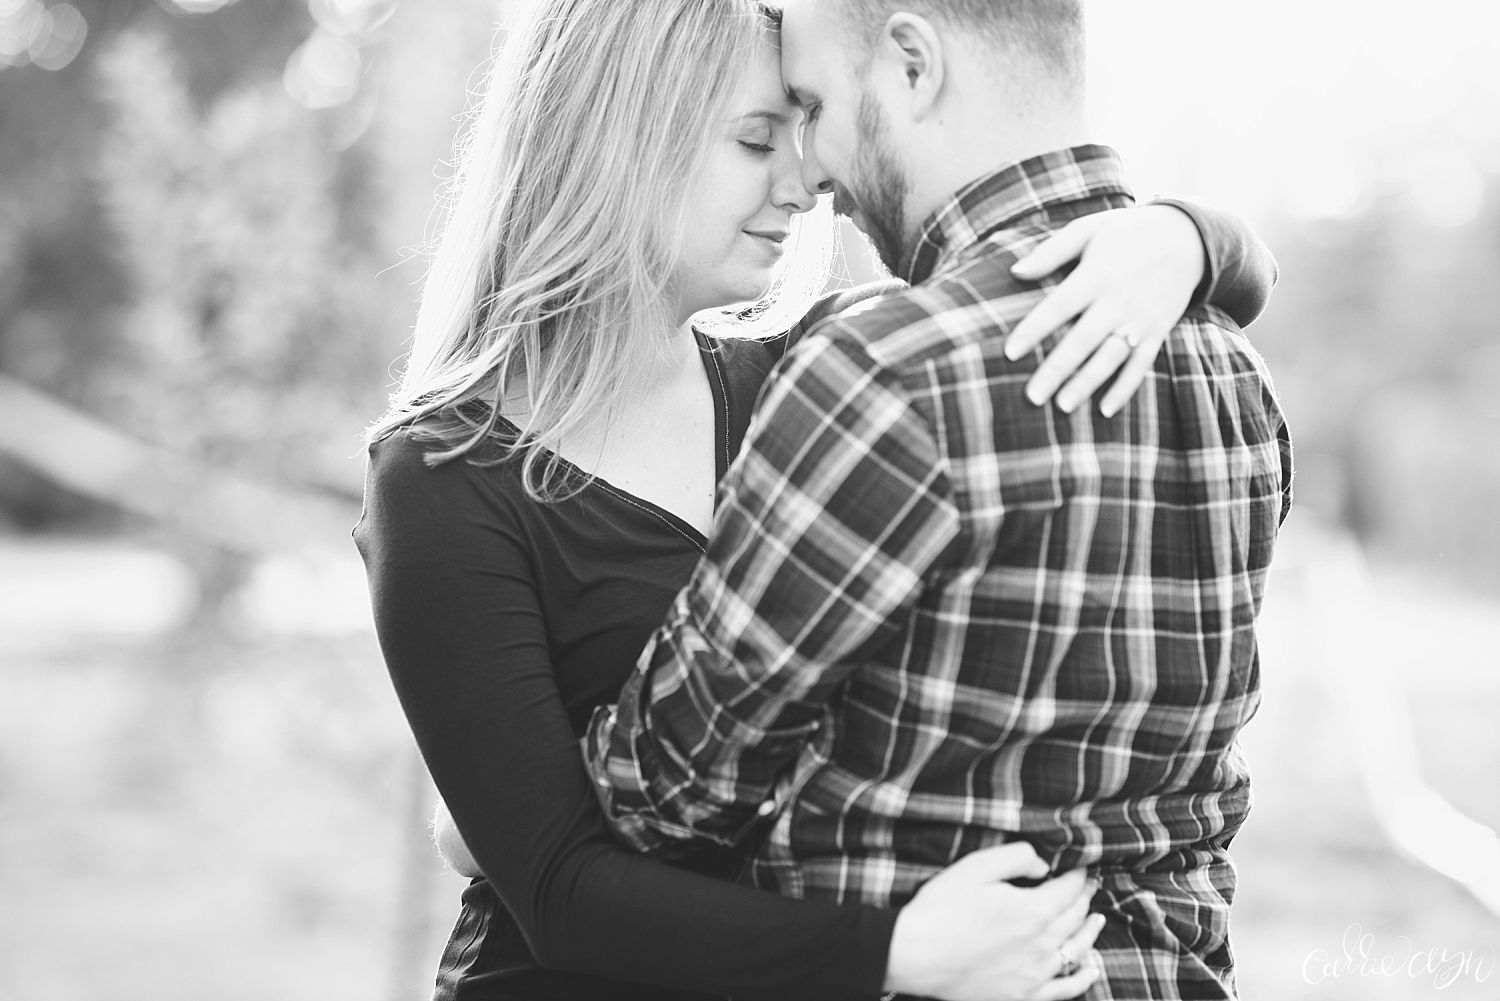 Apple Hill Engagement Session at High Hill Ranch